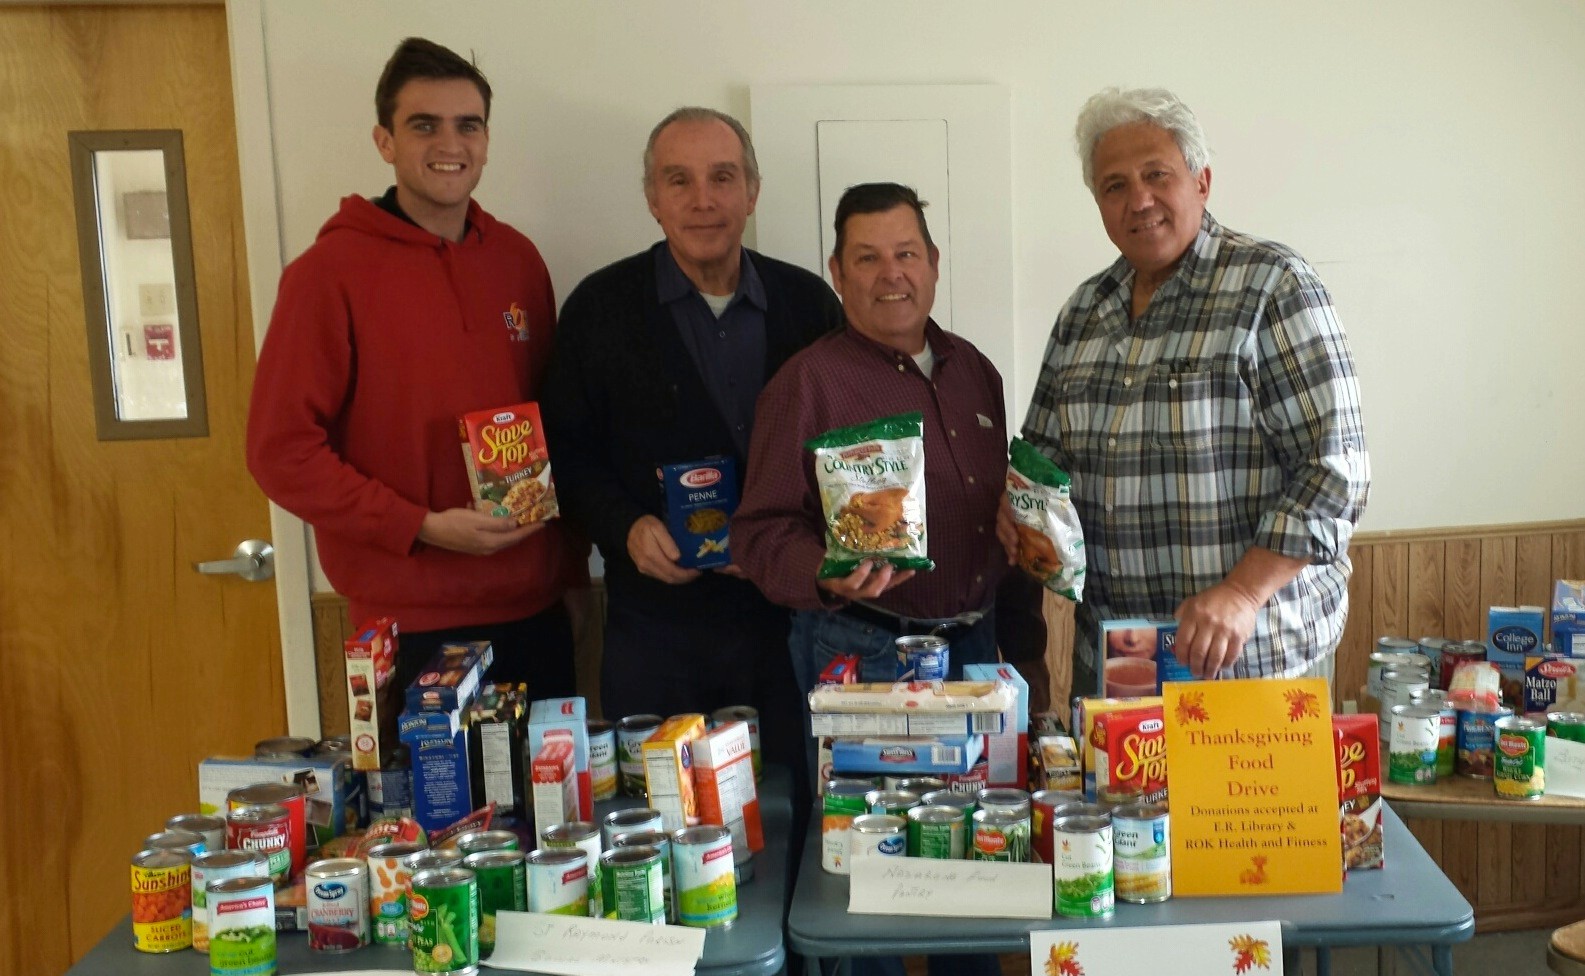 Craig D'urso, left, Al Compagnoni, Ed Corrado, Stanley Lombardo and Mike Hawksby (not pictured) sorted the food that they collected to distribute to local food pantries.